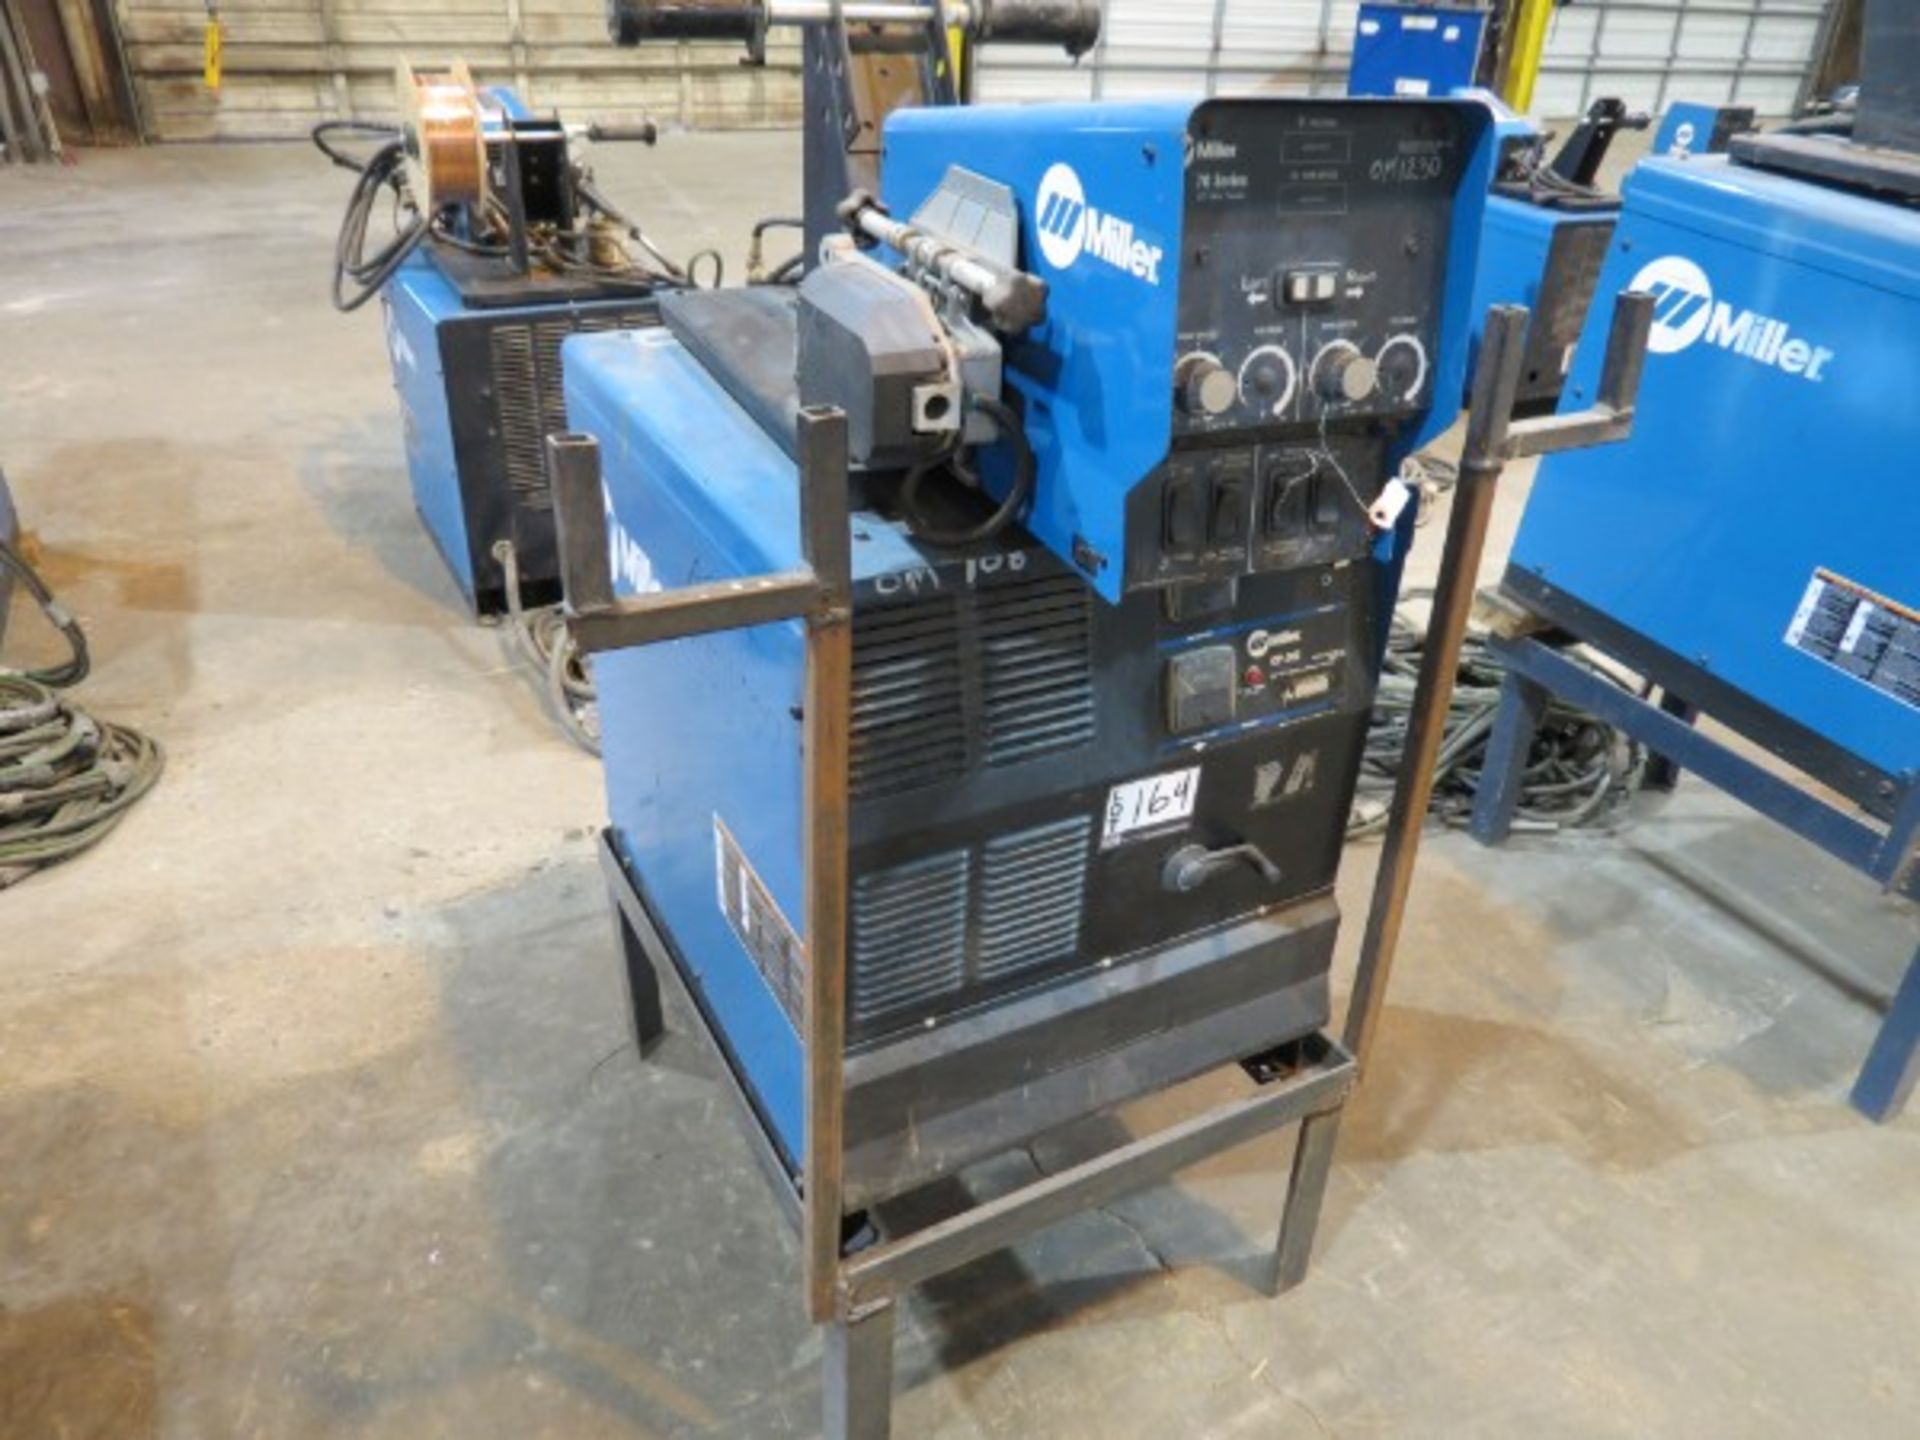 Miller CP-302 With 70 Series Wire Feeder - Image 2 of 4